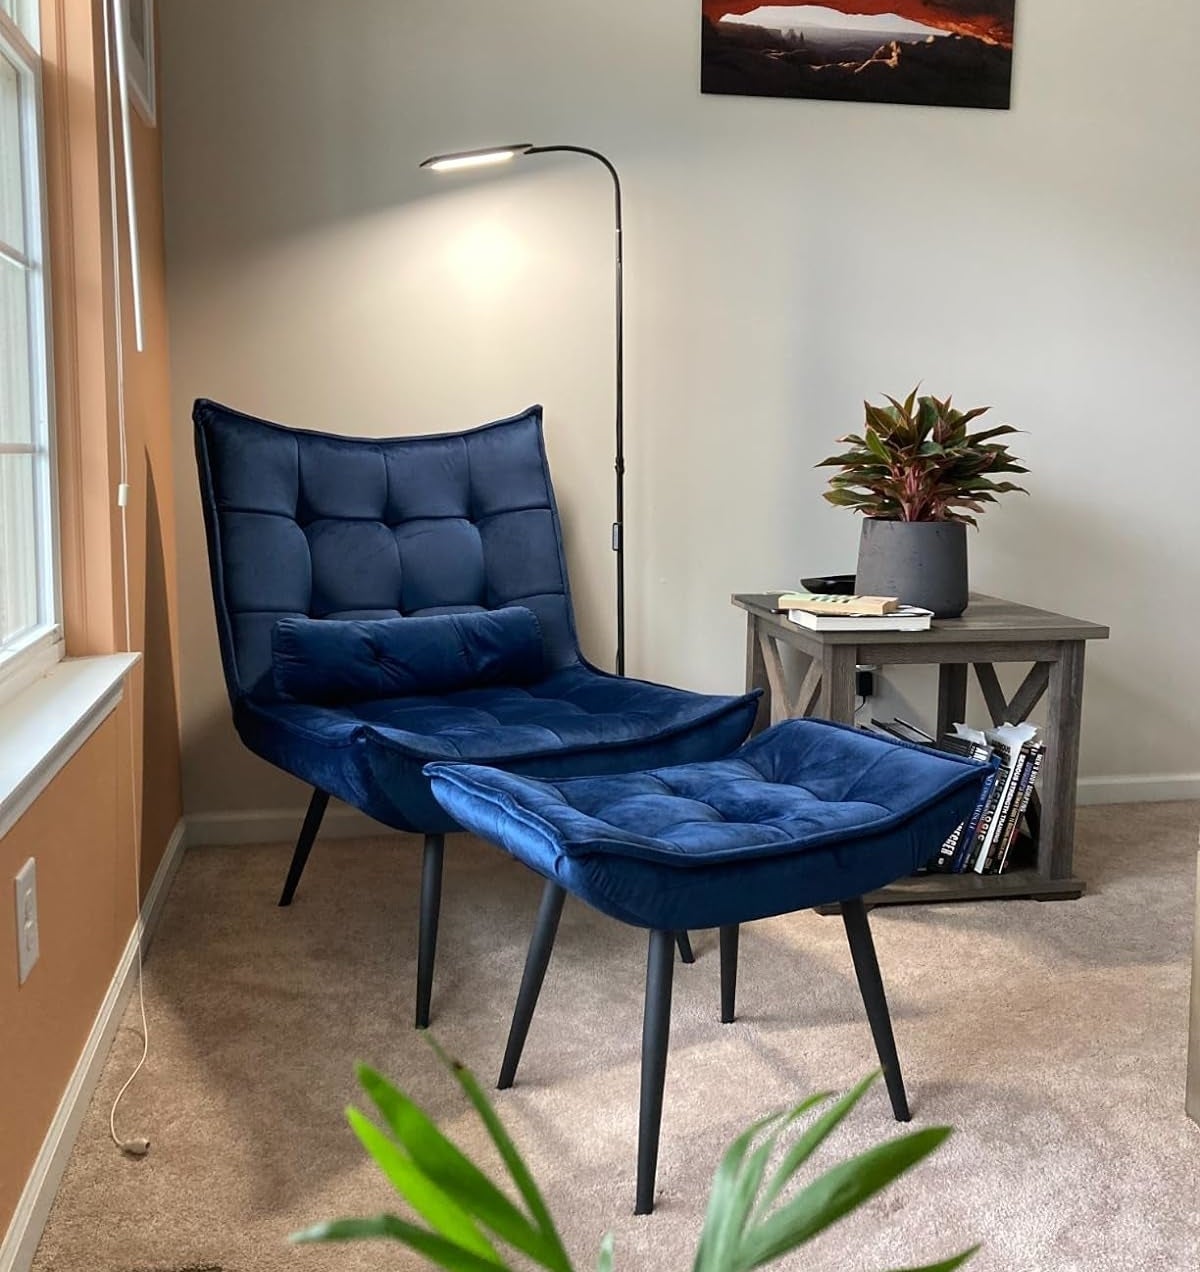 A cozy reading nook with an adjustable floor lamp and a tufted blue lounge chair next to a wooden side table with a plant